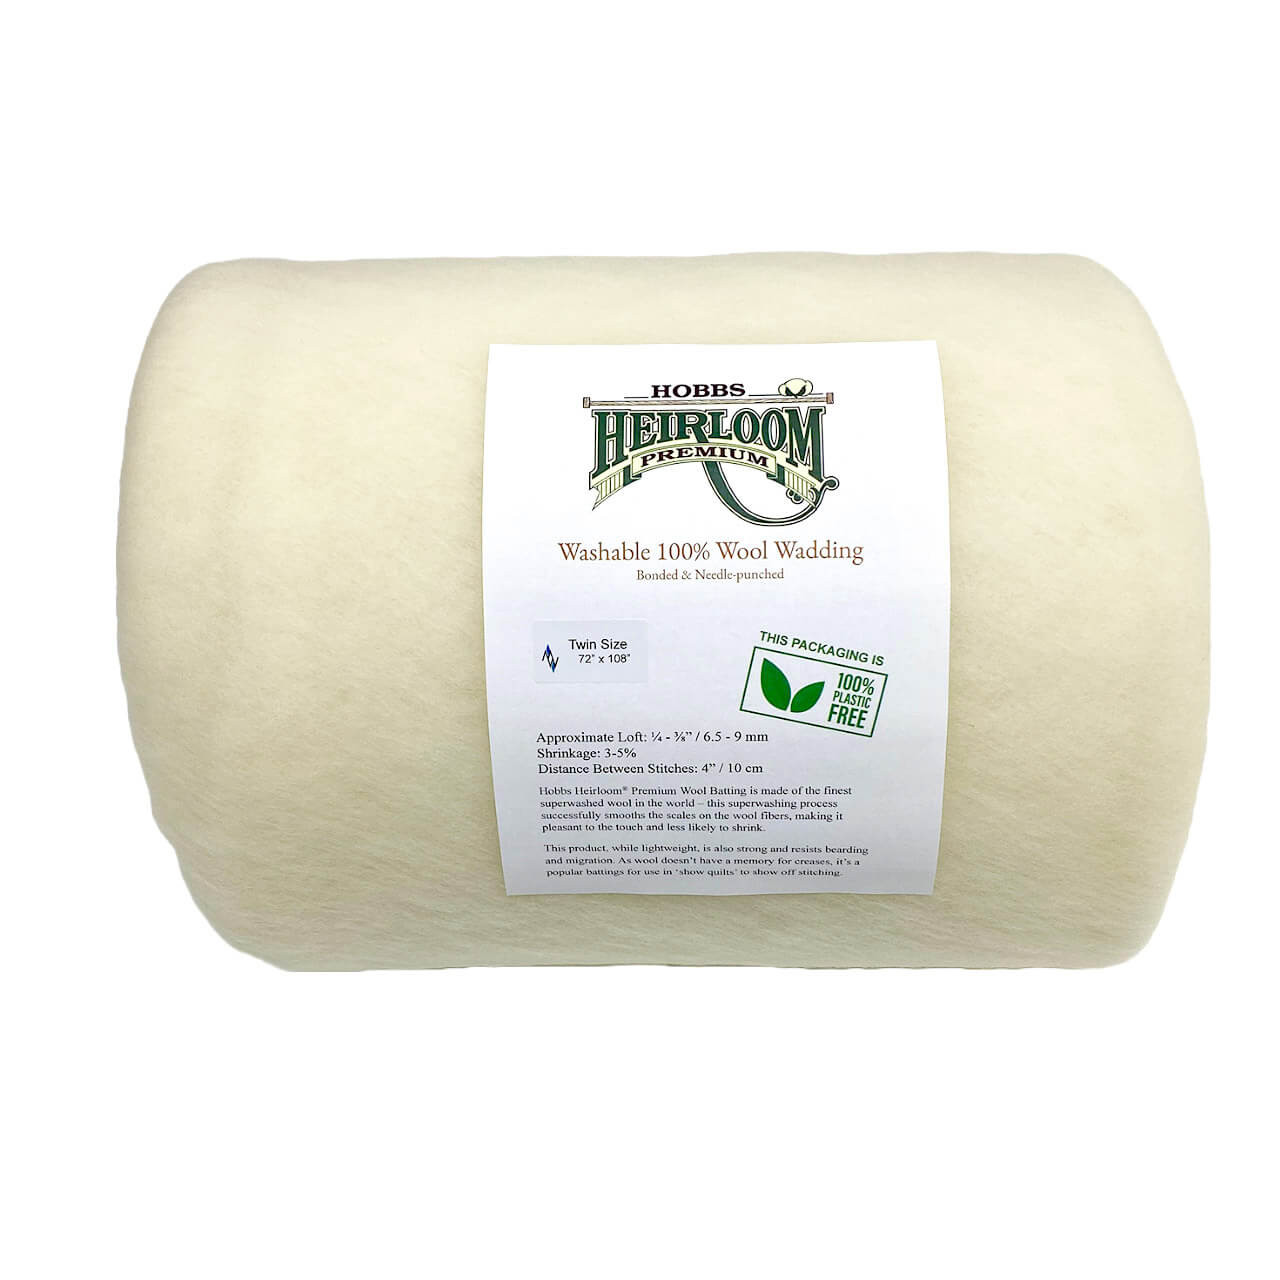 Heirloom Premium 100% Natural Wool Wadding - Twin size pack